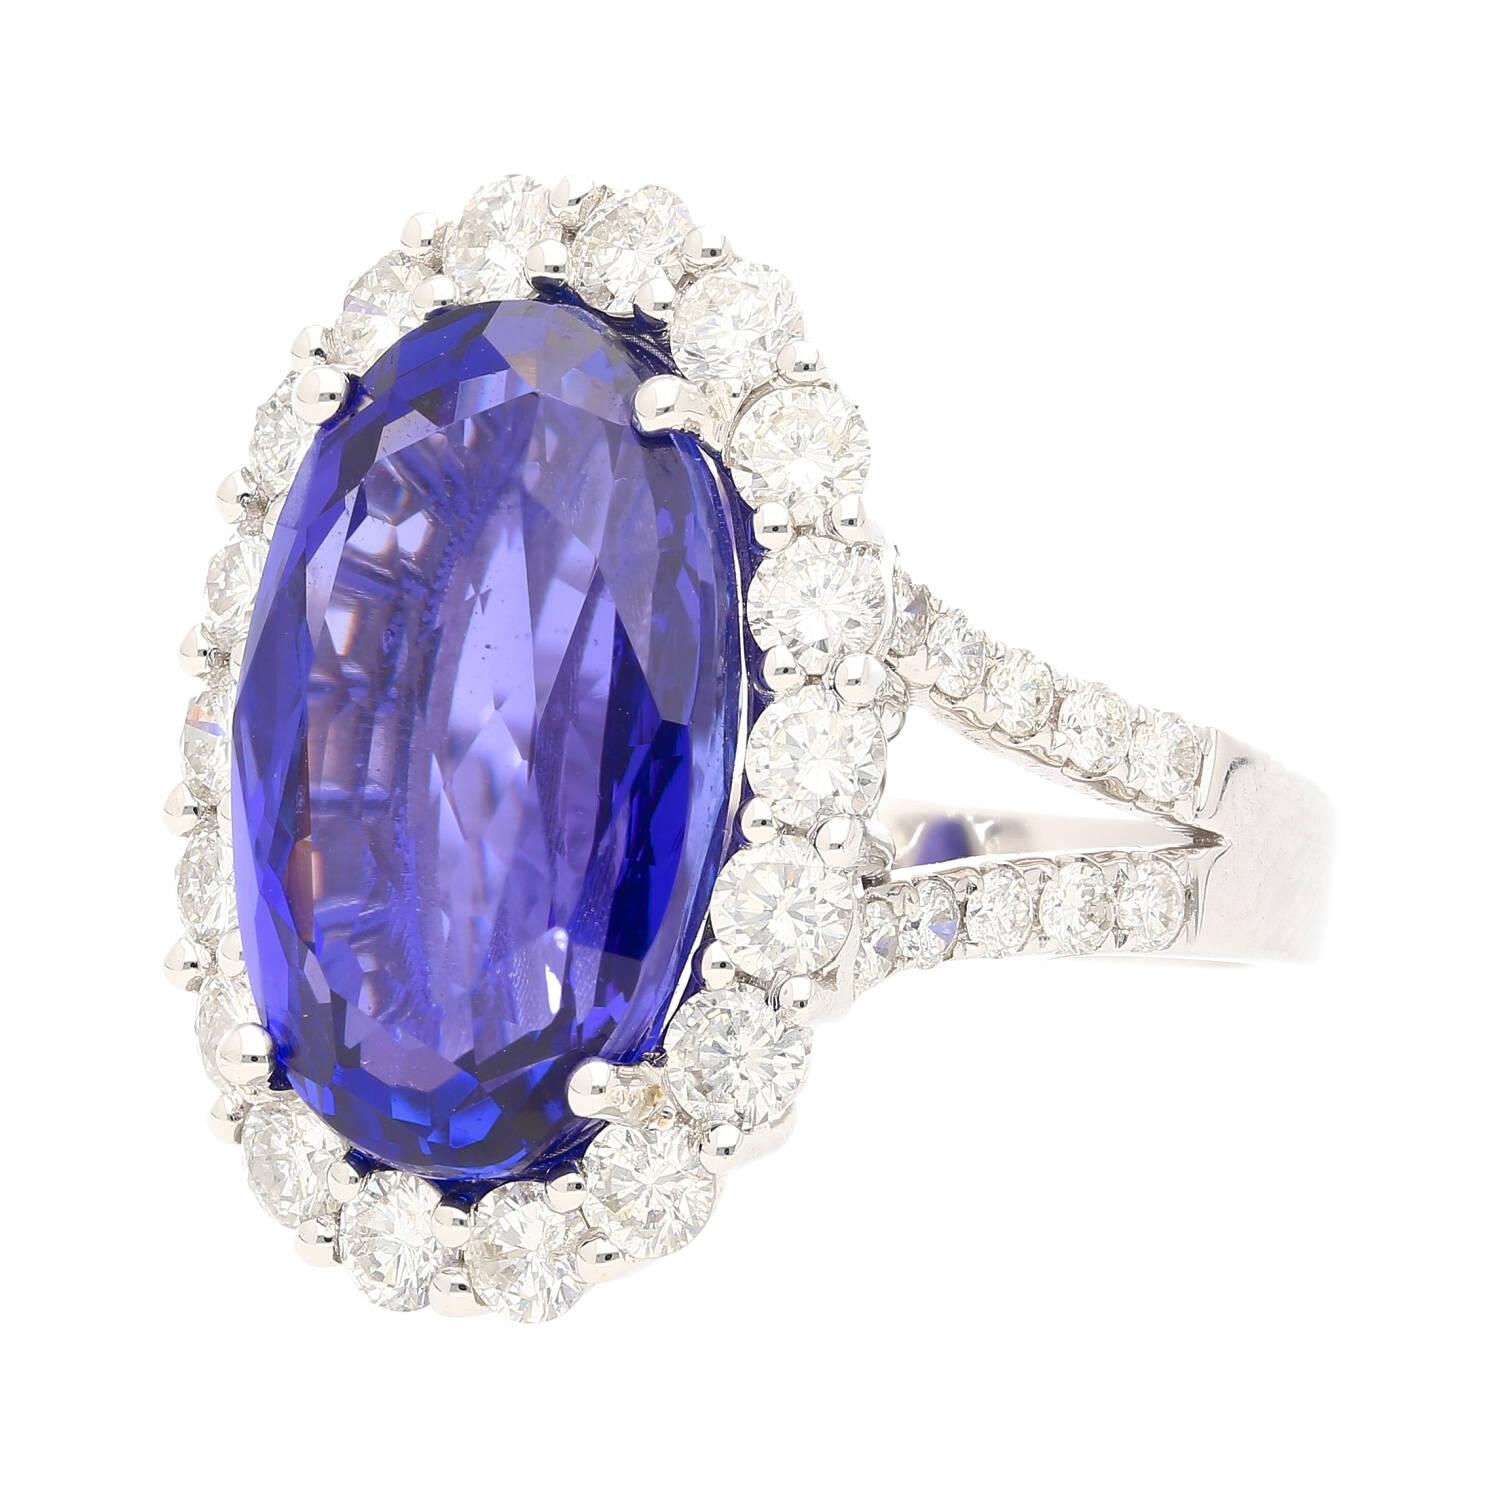 Experience the pinnacle of luxury with this exquisite ring, featuring a magnificent 15-carat oval cut natural tanzanite. The tanzanite, of super fine grade V-AAA quality, showcases a captivating deep violet hue and eye clean clarity that captures